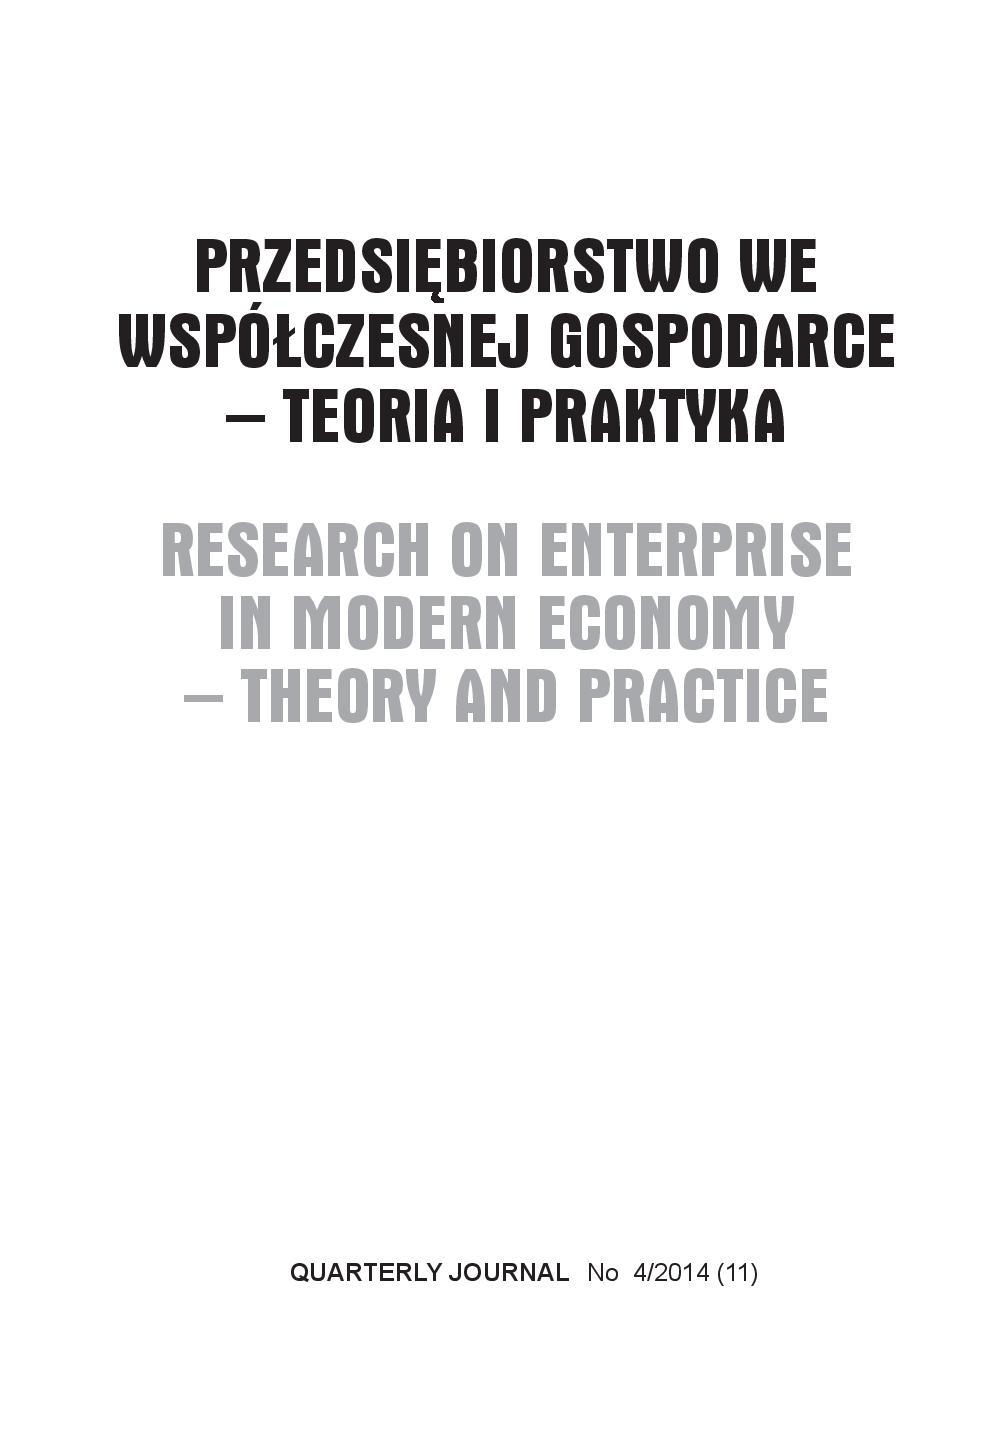 INTERNATIONALIZATION OF ENTERPRISES AS ASSESSED BY UNIVERSITY STUDENTS: PROSPECTIVE AND CURRENT
ENTREPRENEURS Cover Image